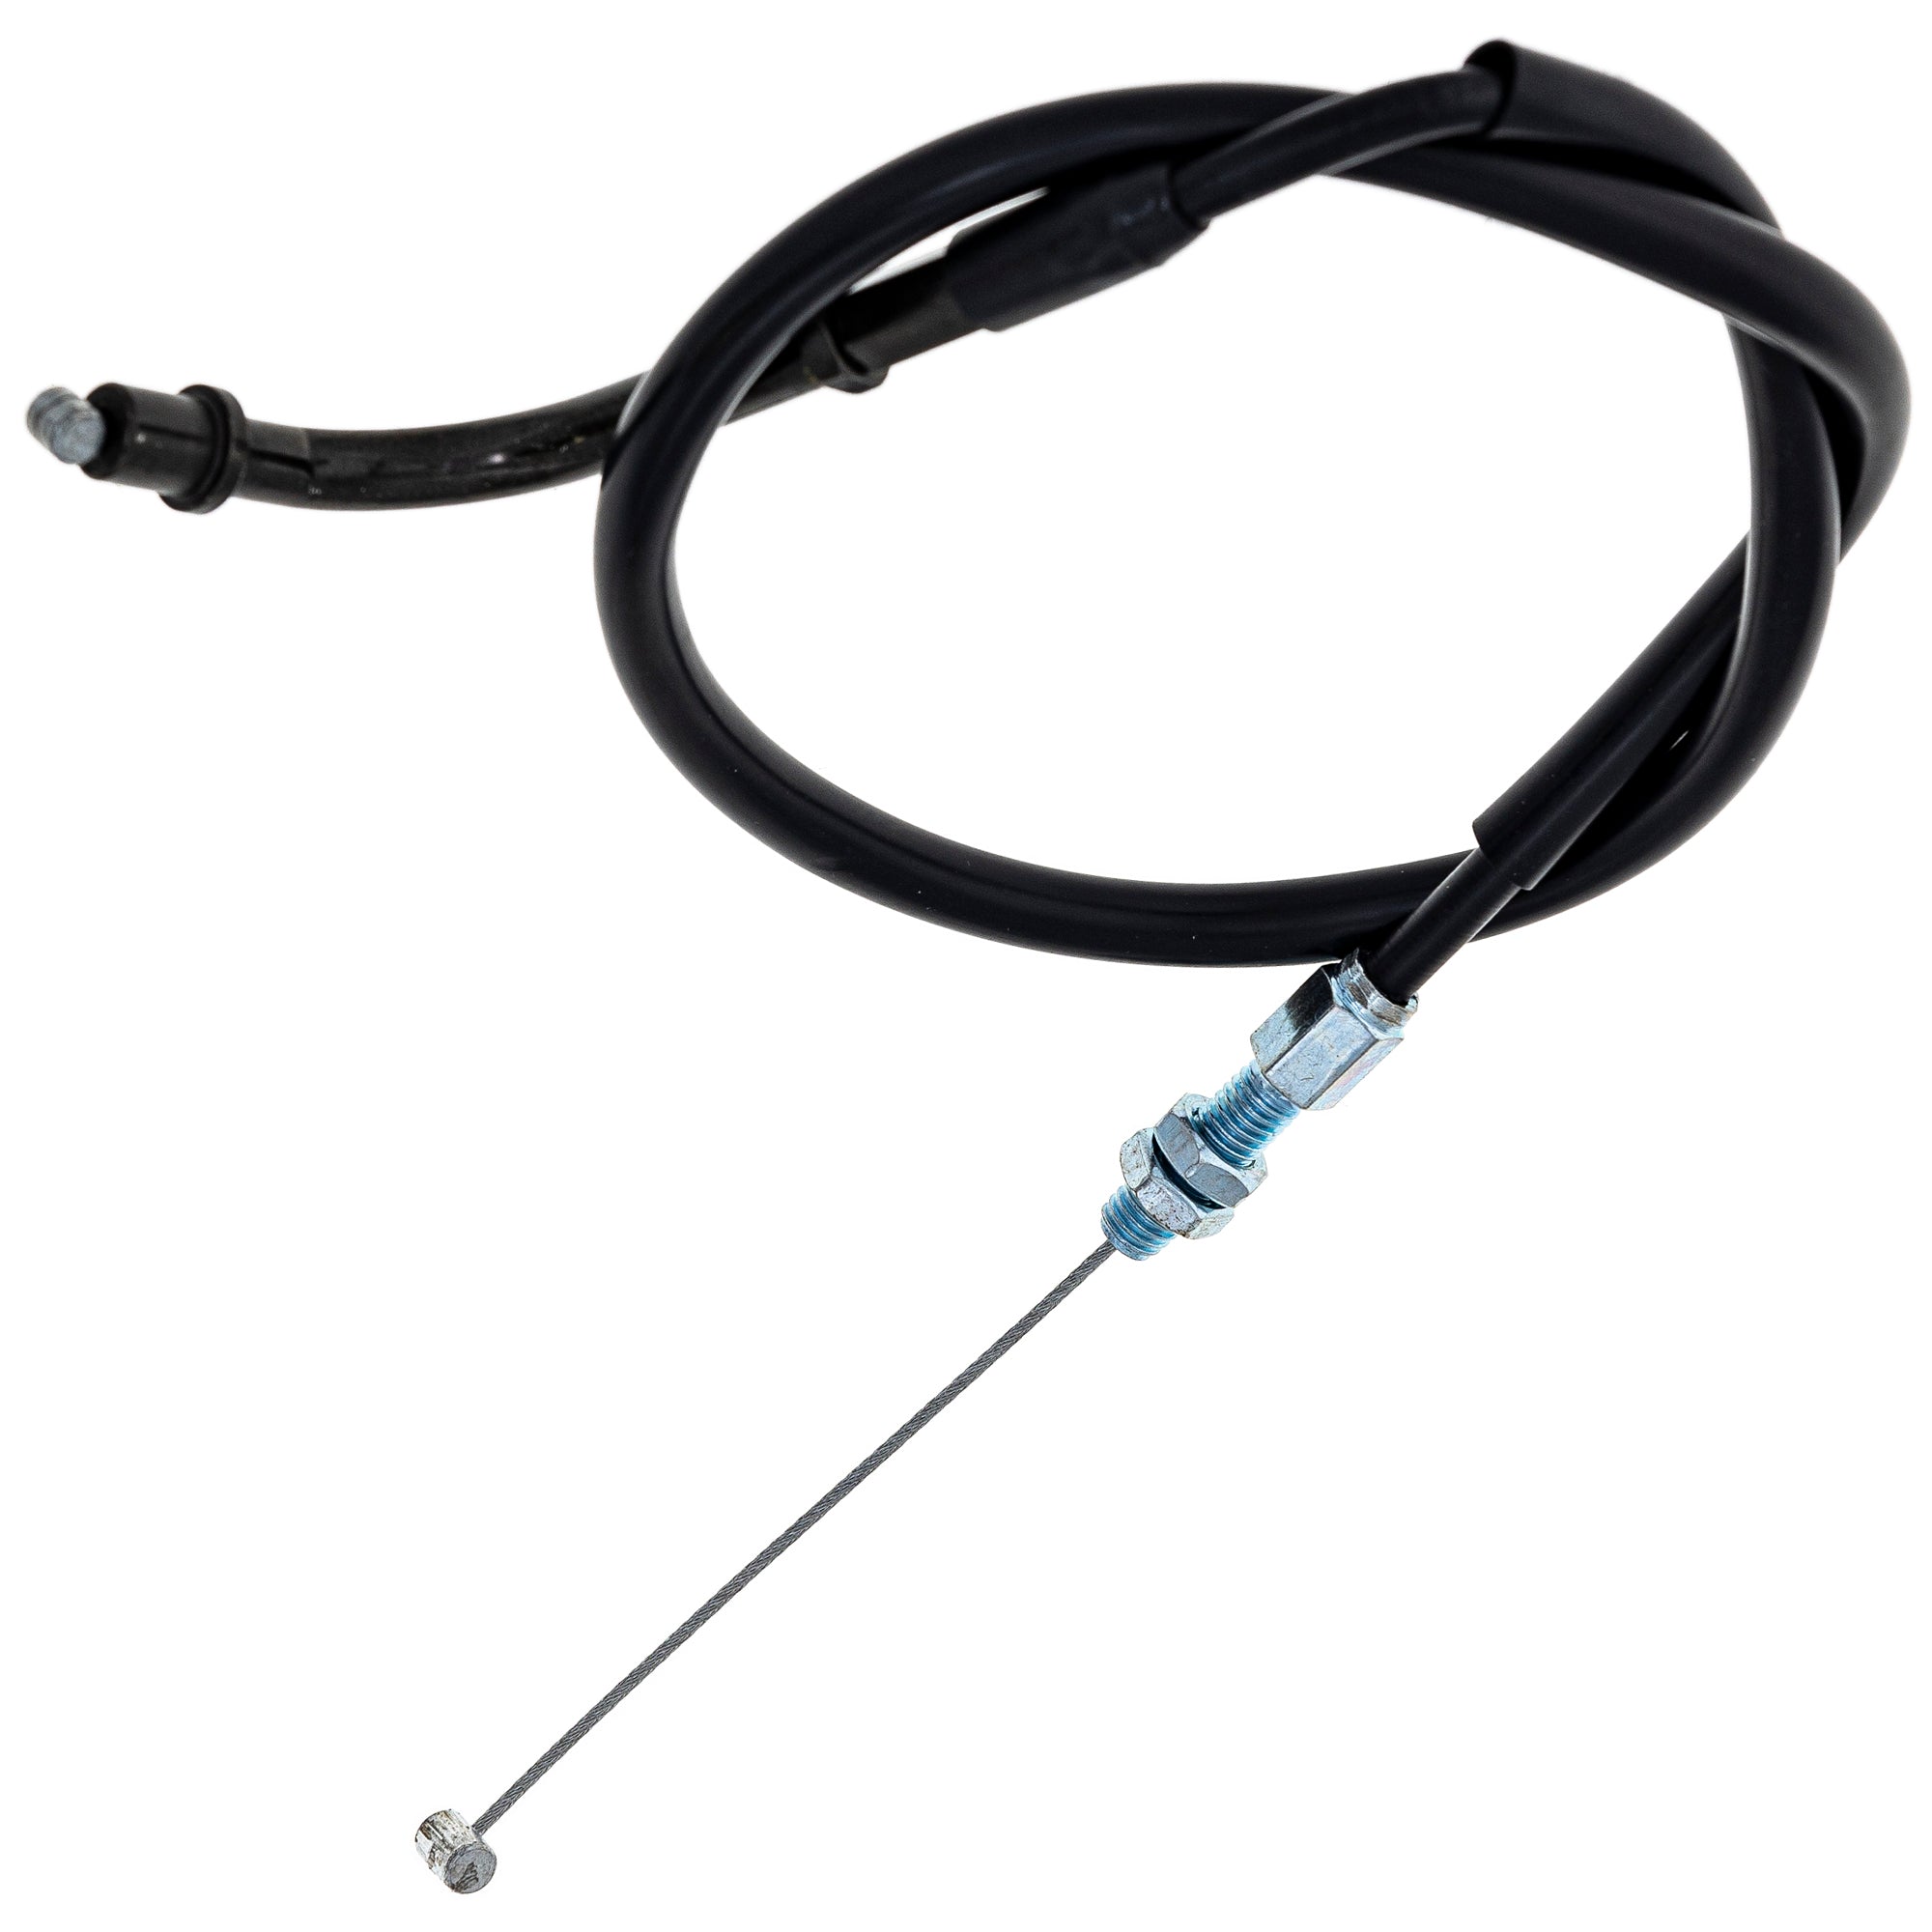 Pull Throttle Cable for Suzuki GSXR1000 58300-47H01 Motorcycle